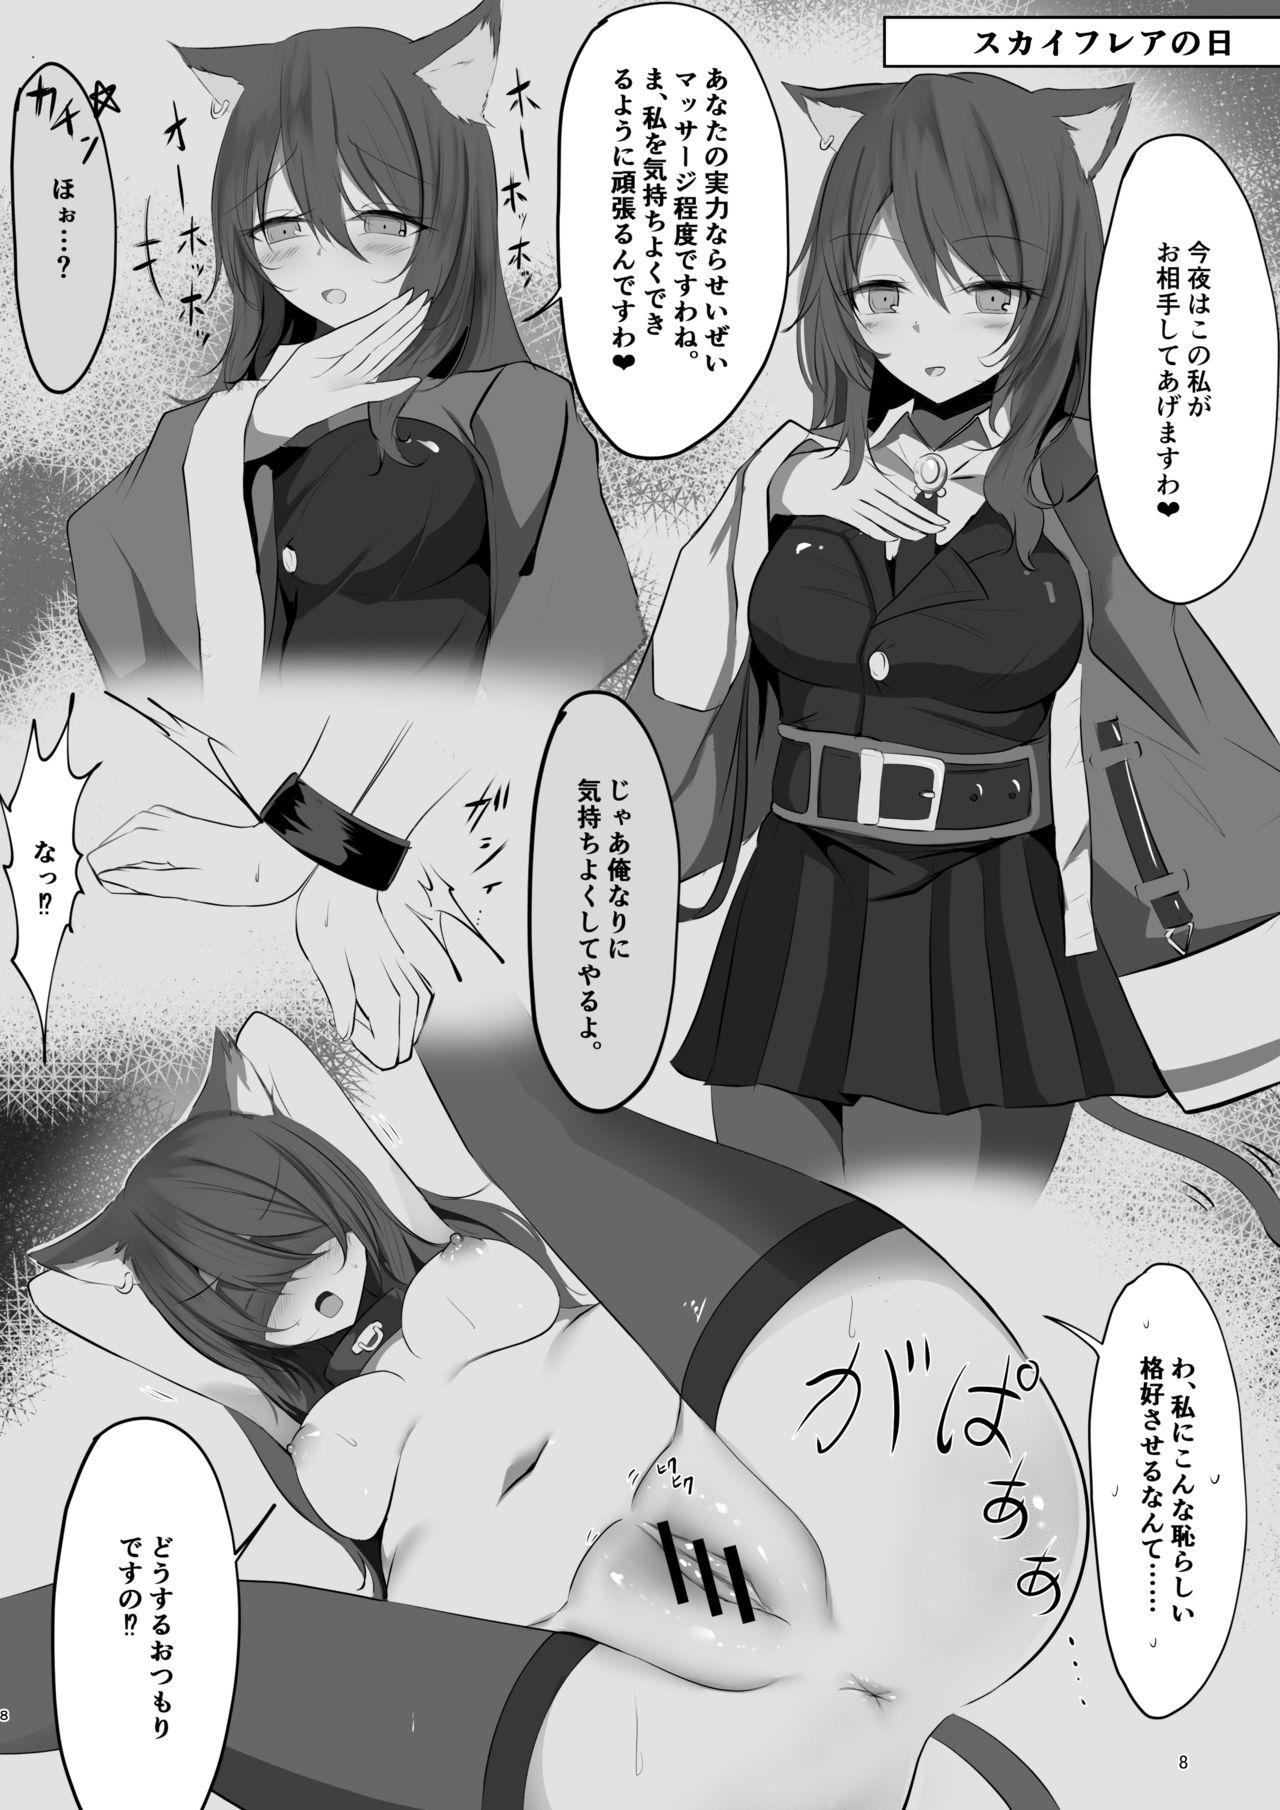 Gay Trimmed 夜な夜な扇情作戦記録 - Arknights Clit - Page 8